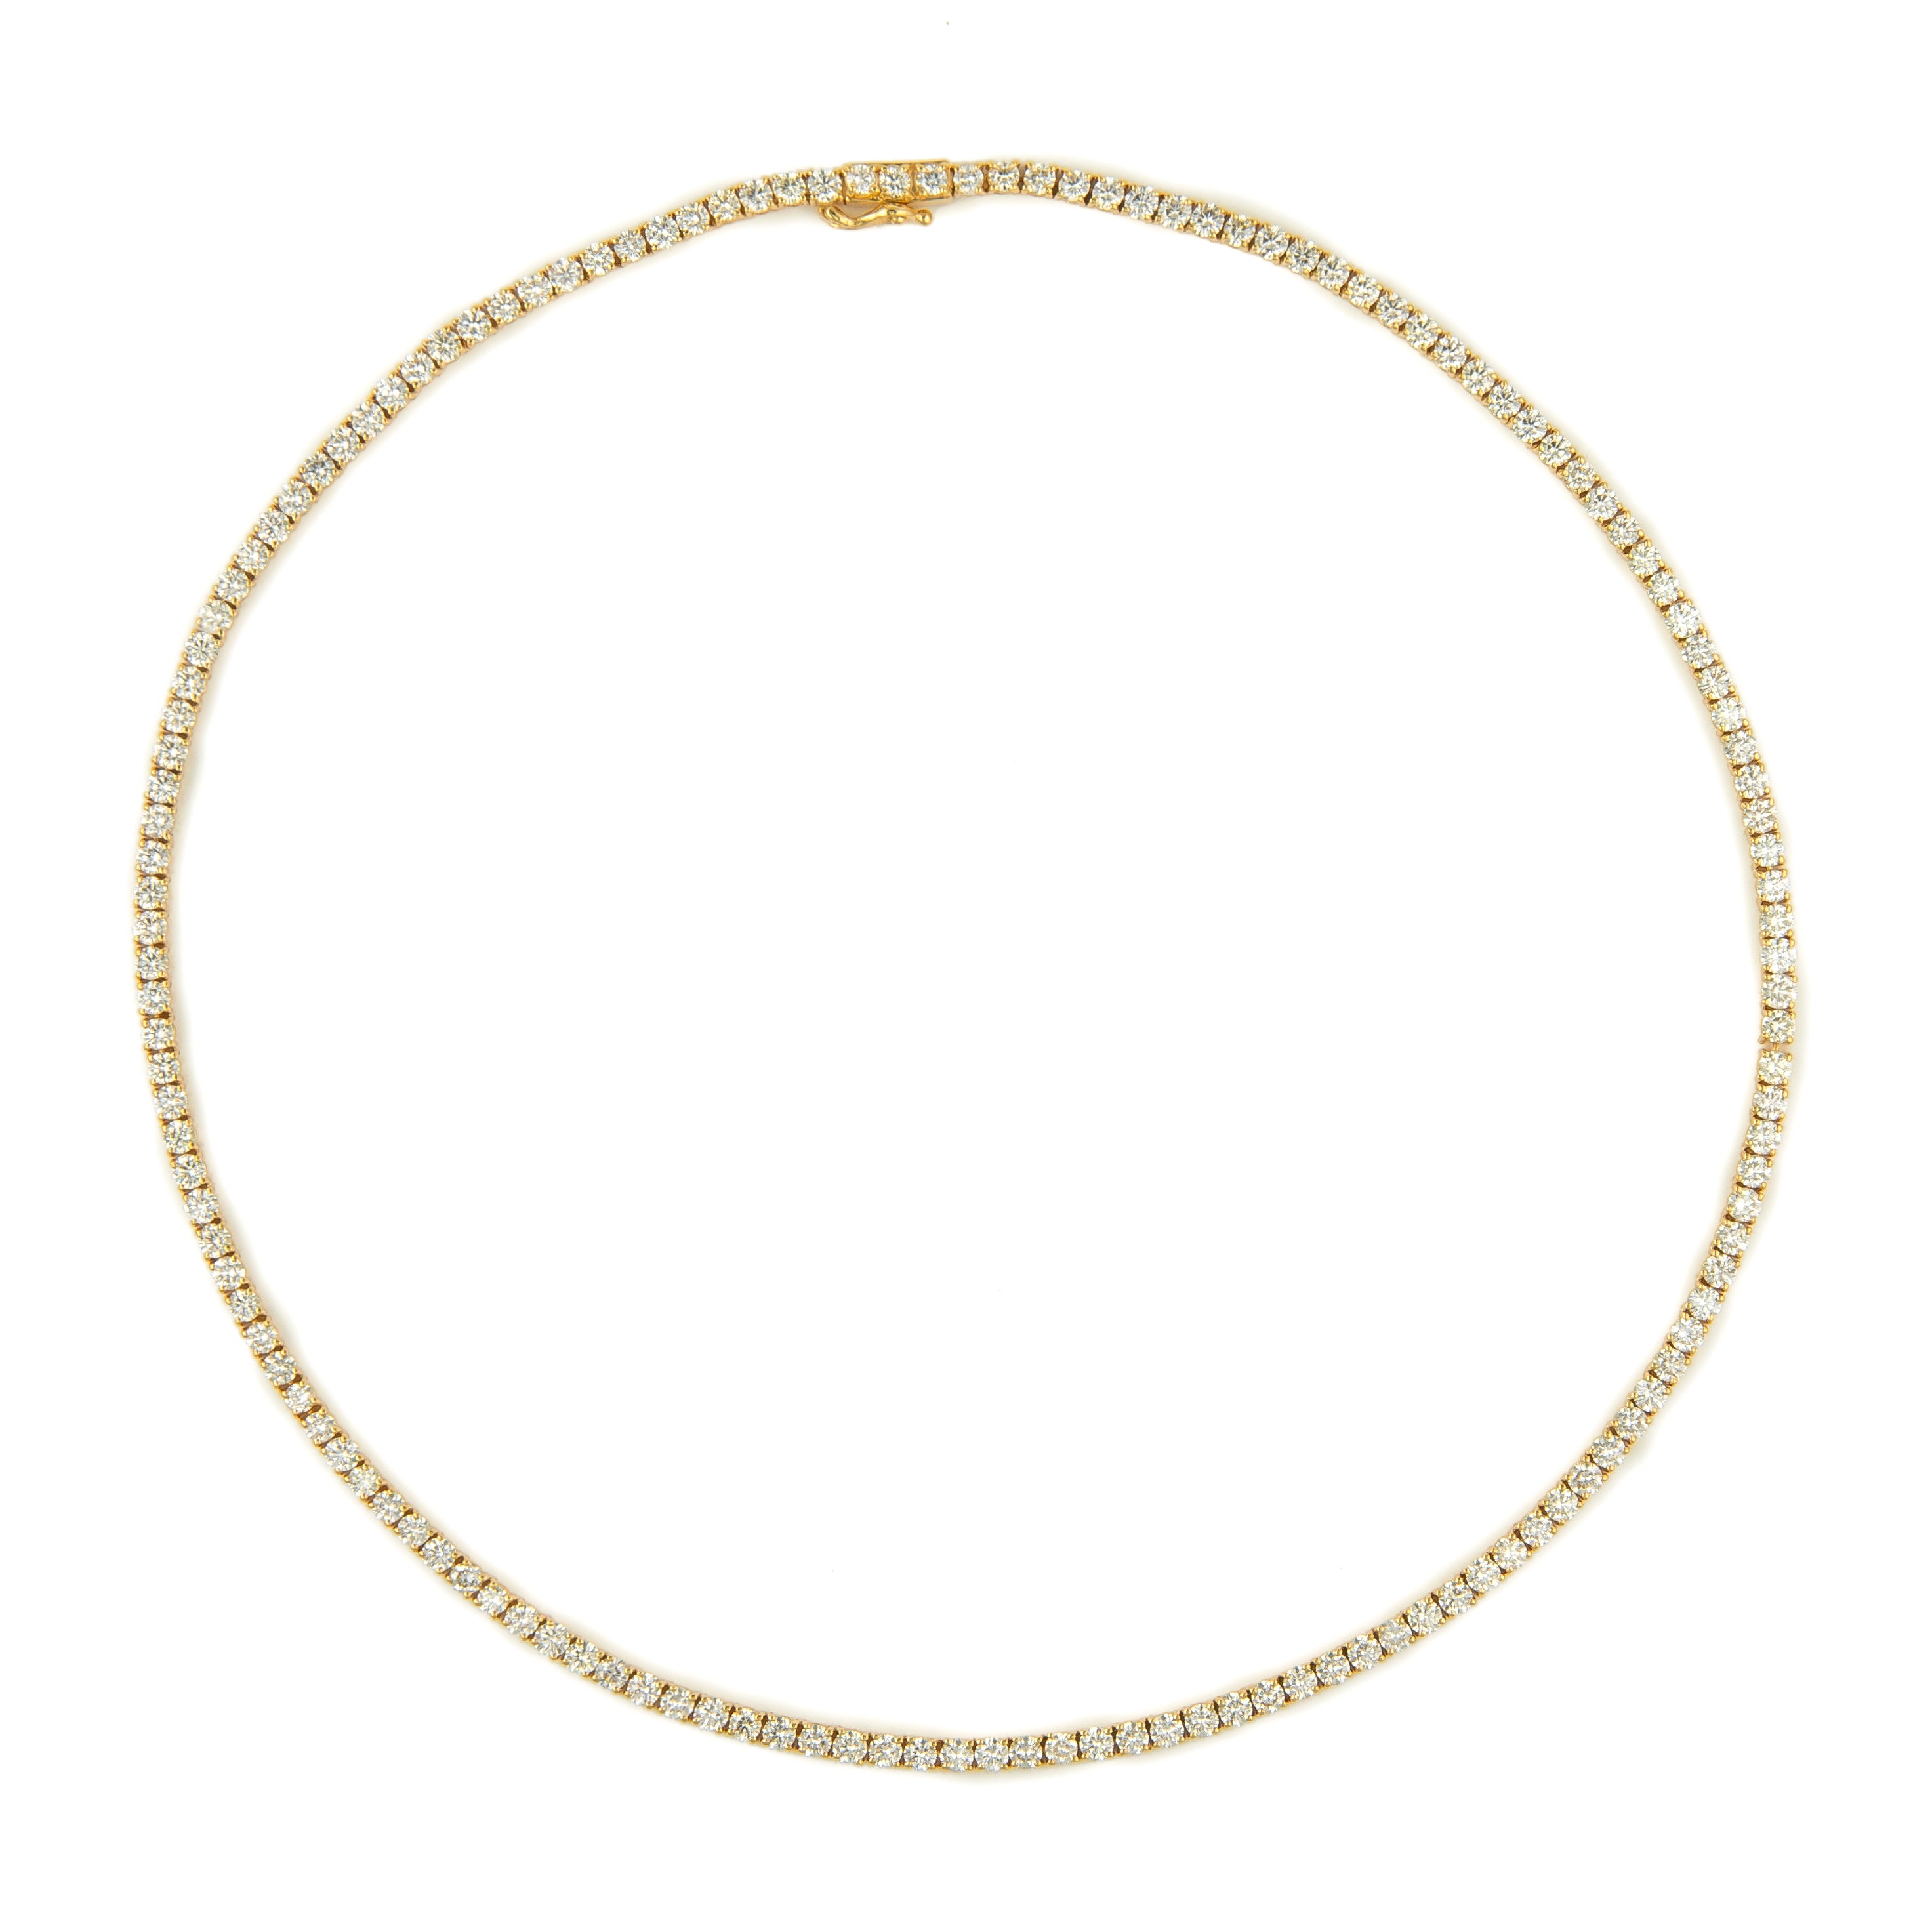 Beautiful modern diamond tennis necklace. Created by Alexander Beverly Hills.
142 round brilliant diamonds, 15.84 carats. Approximately H/I color and VS clarity. 18k yellow gold, 23.30 grams, 18.25in.
Accommodated with an up to date appraisal by a